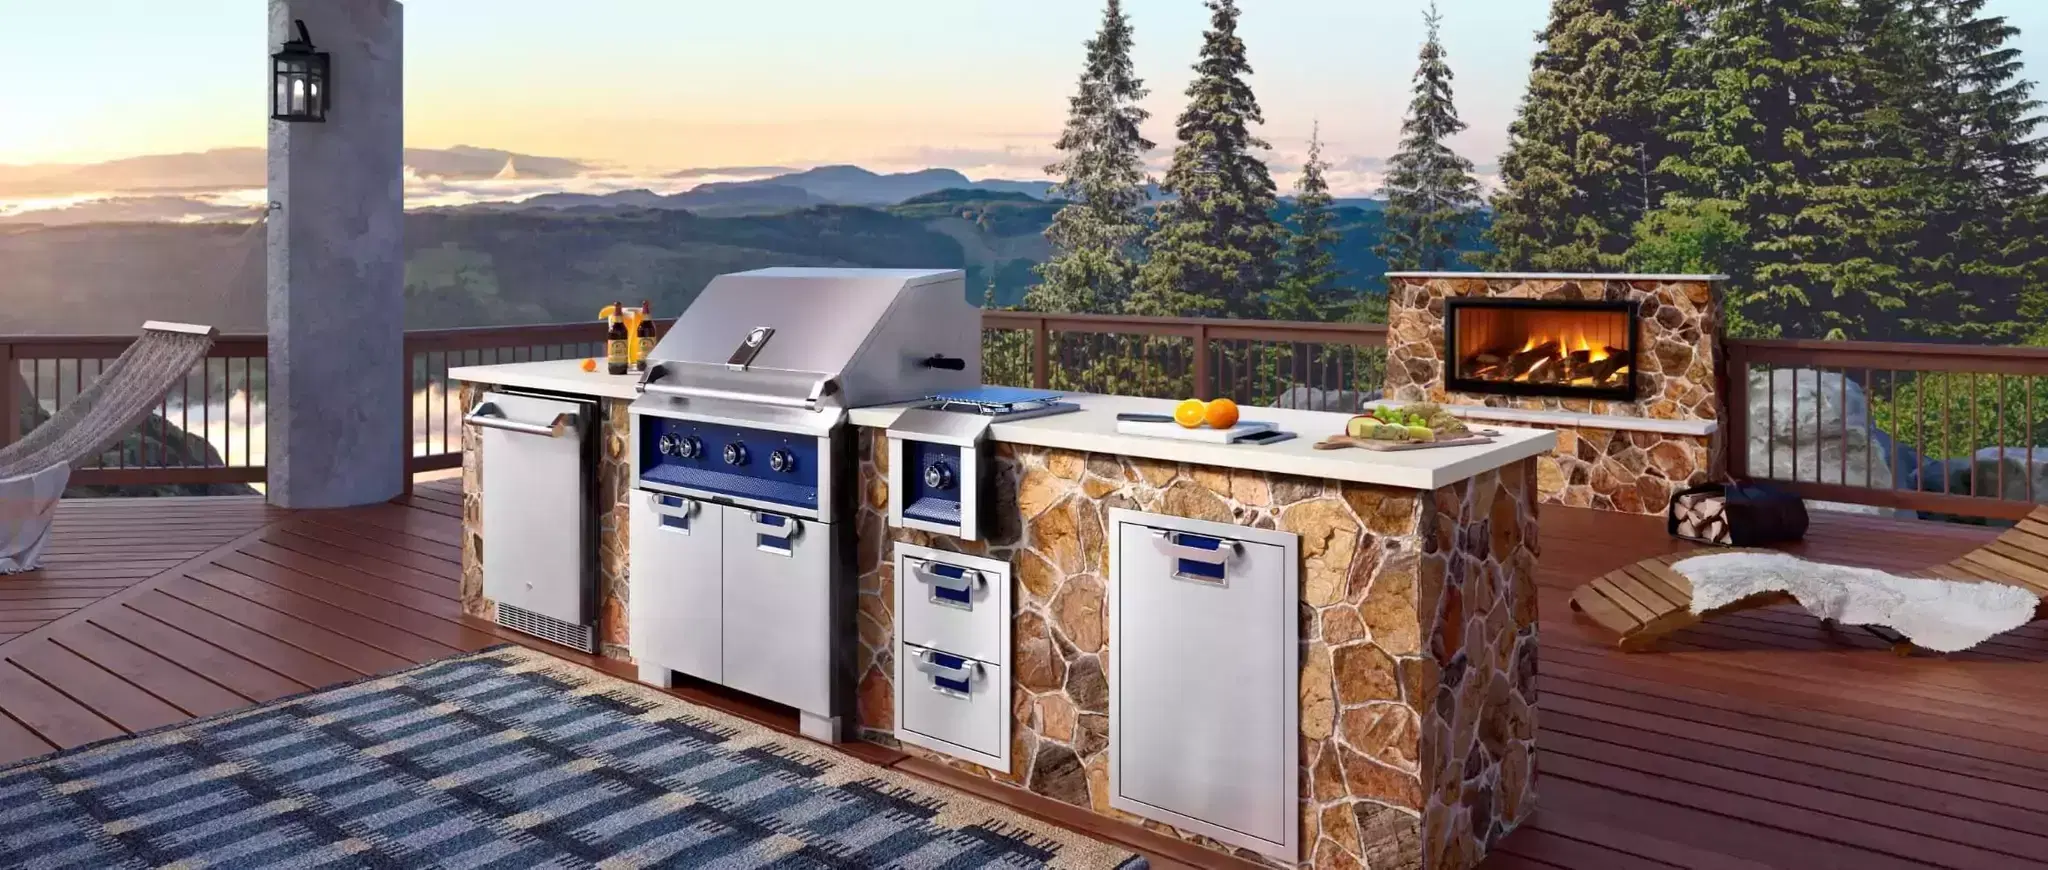 How to winterize your outdoor kitchen